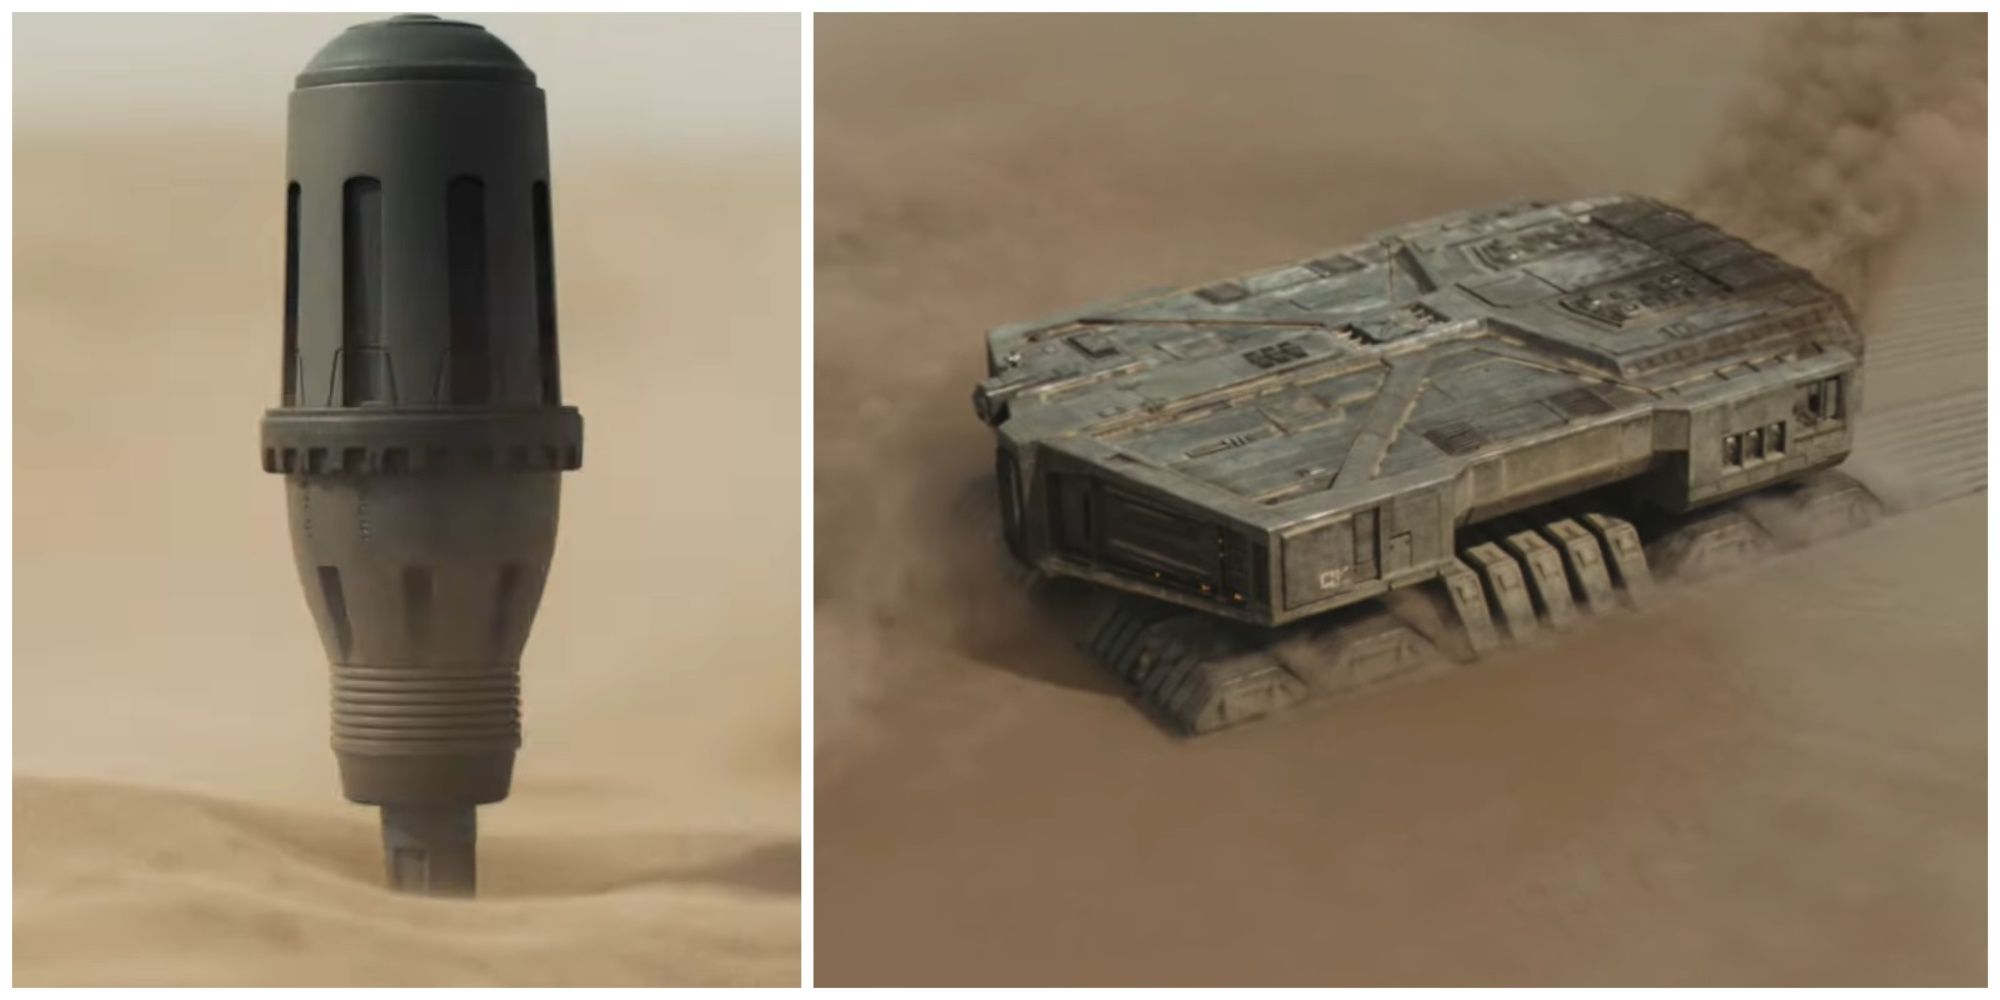 Split image showing a thumper and spice harvester in Dune.